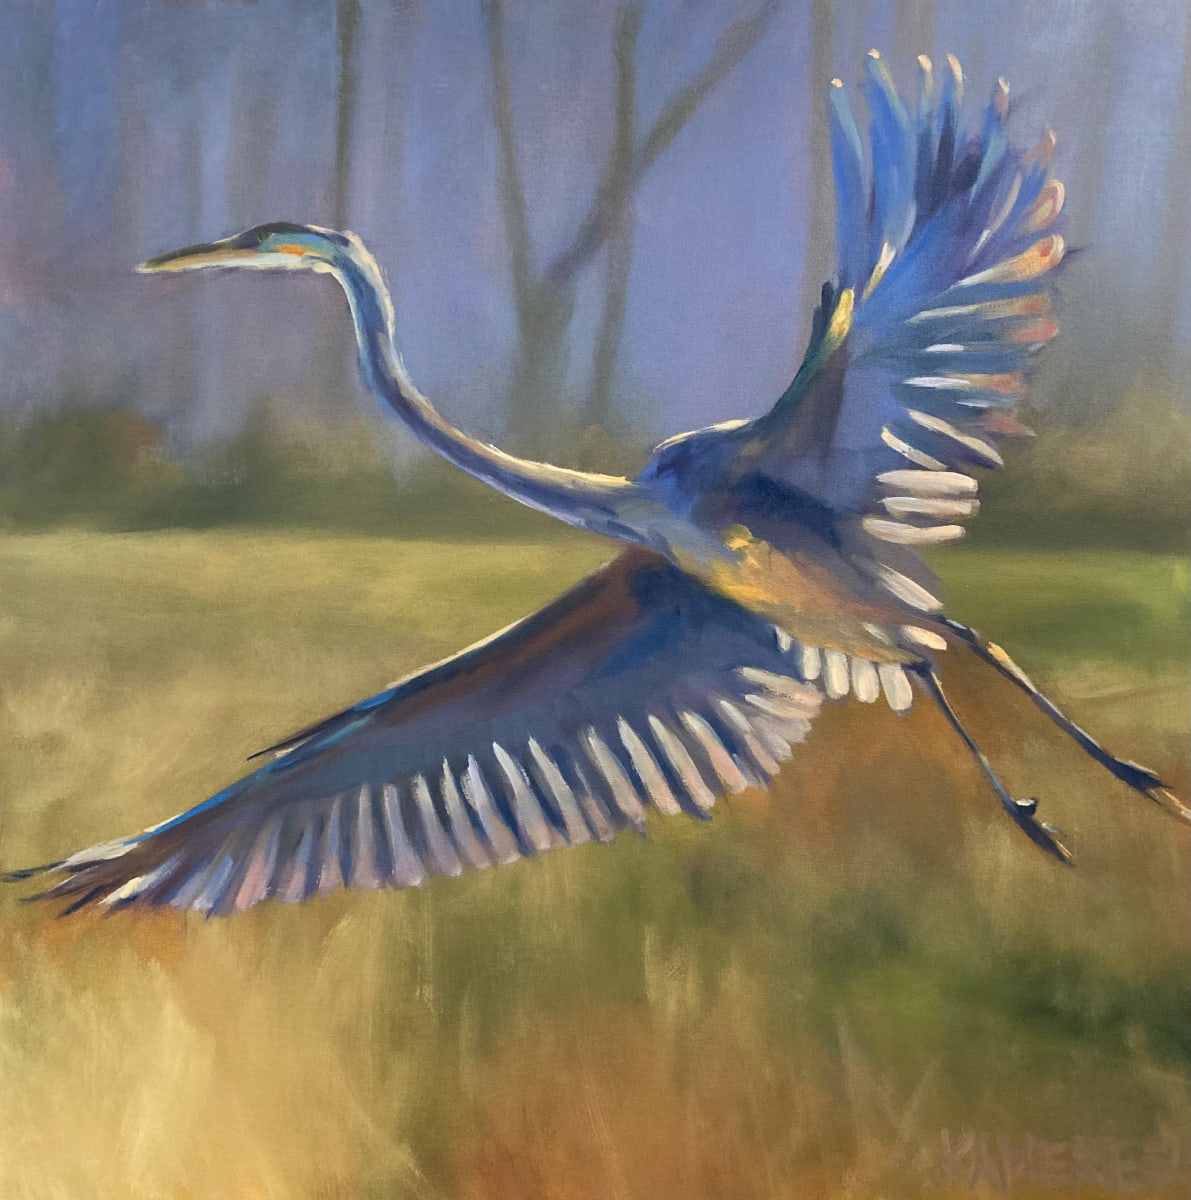 Illuminated Lift-Off by Mary Kamerer Impressionist Painting  Image: Majestic in their size and grace, a great blue herong lifts from low country grasses of a marsh. Light catches the translucency of his wings and illuminates them in lift-off.